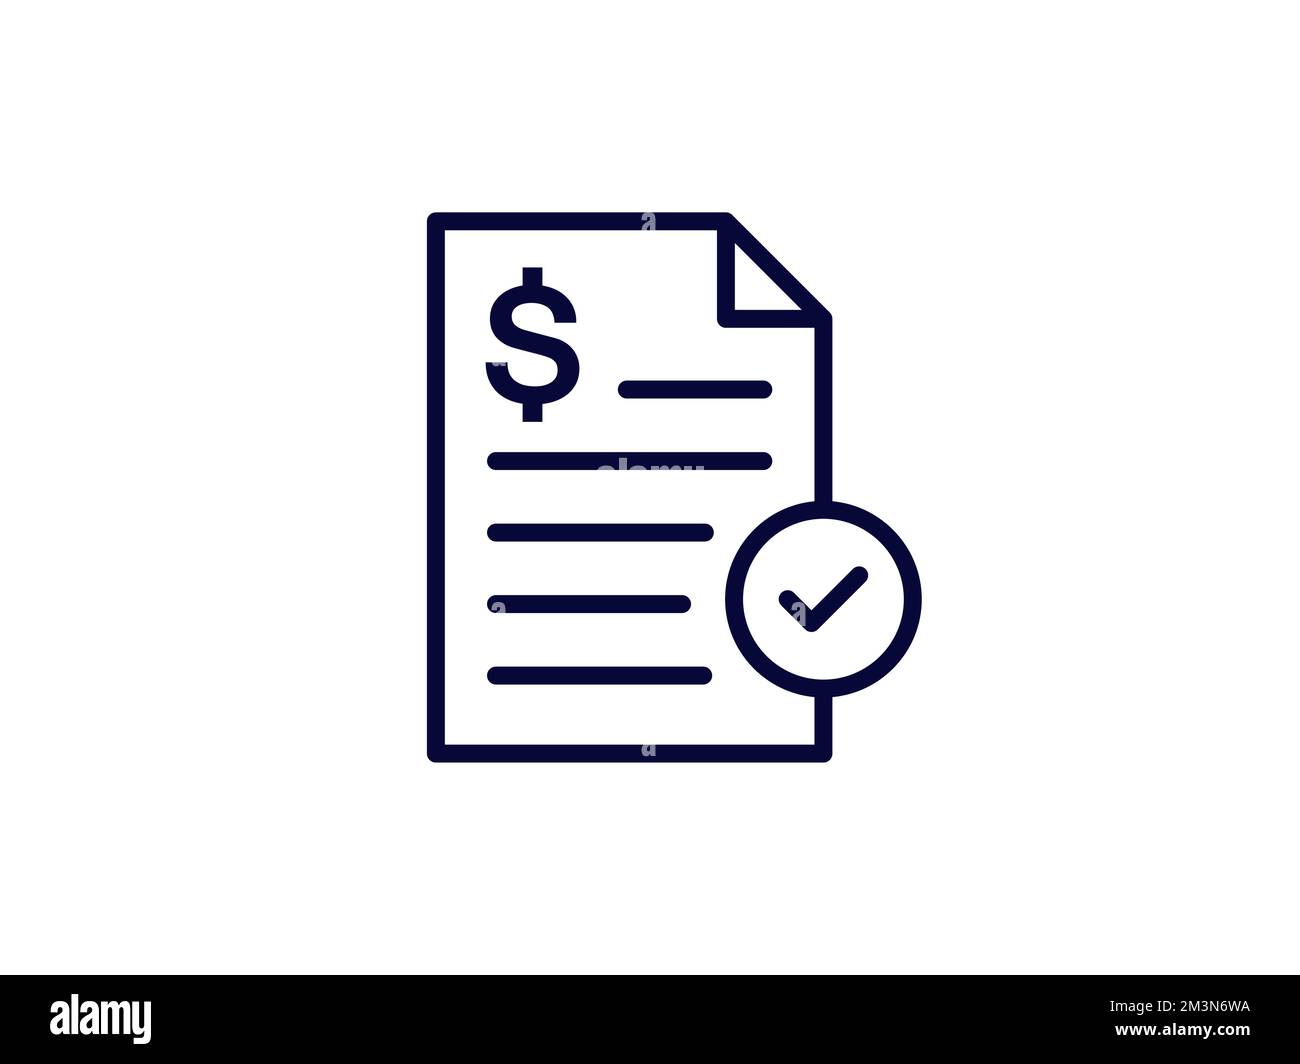 Invoice icon. Payment and bill invoice. Tax receipt sign design. Order symbol concept. Payroll document icon. Vector invoice icon Stock Vector